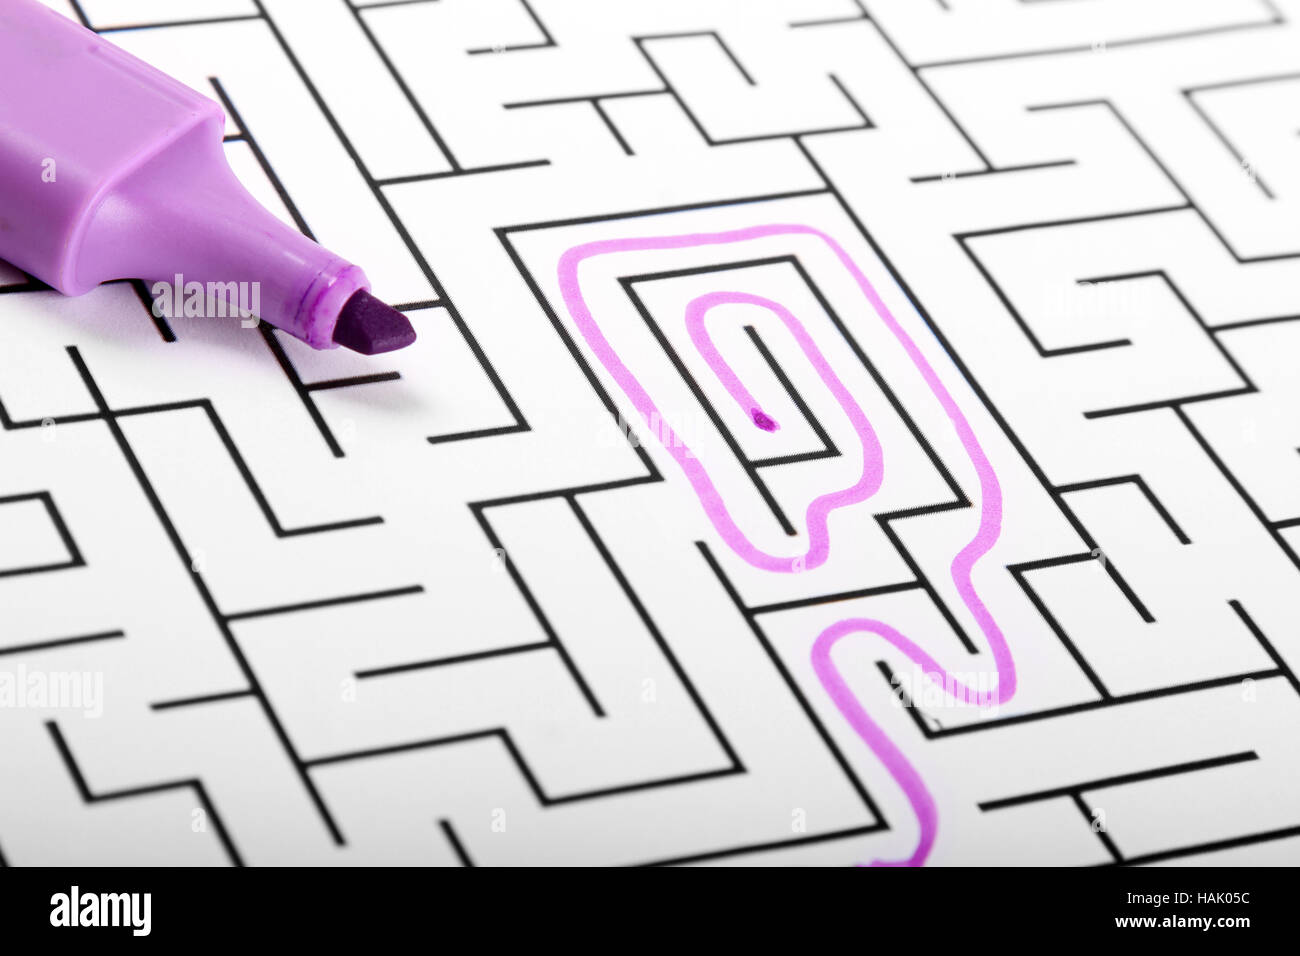 trying to find way out of maze Stock Photo